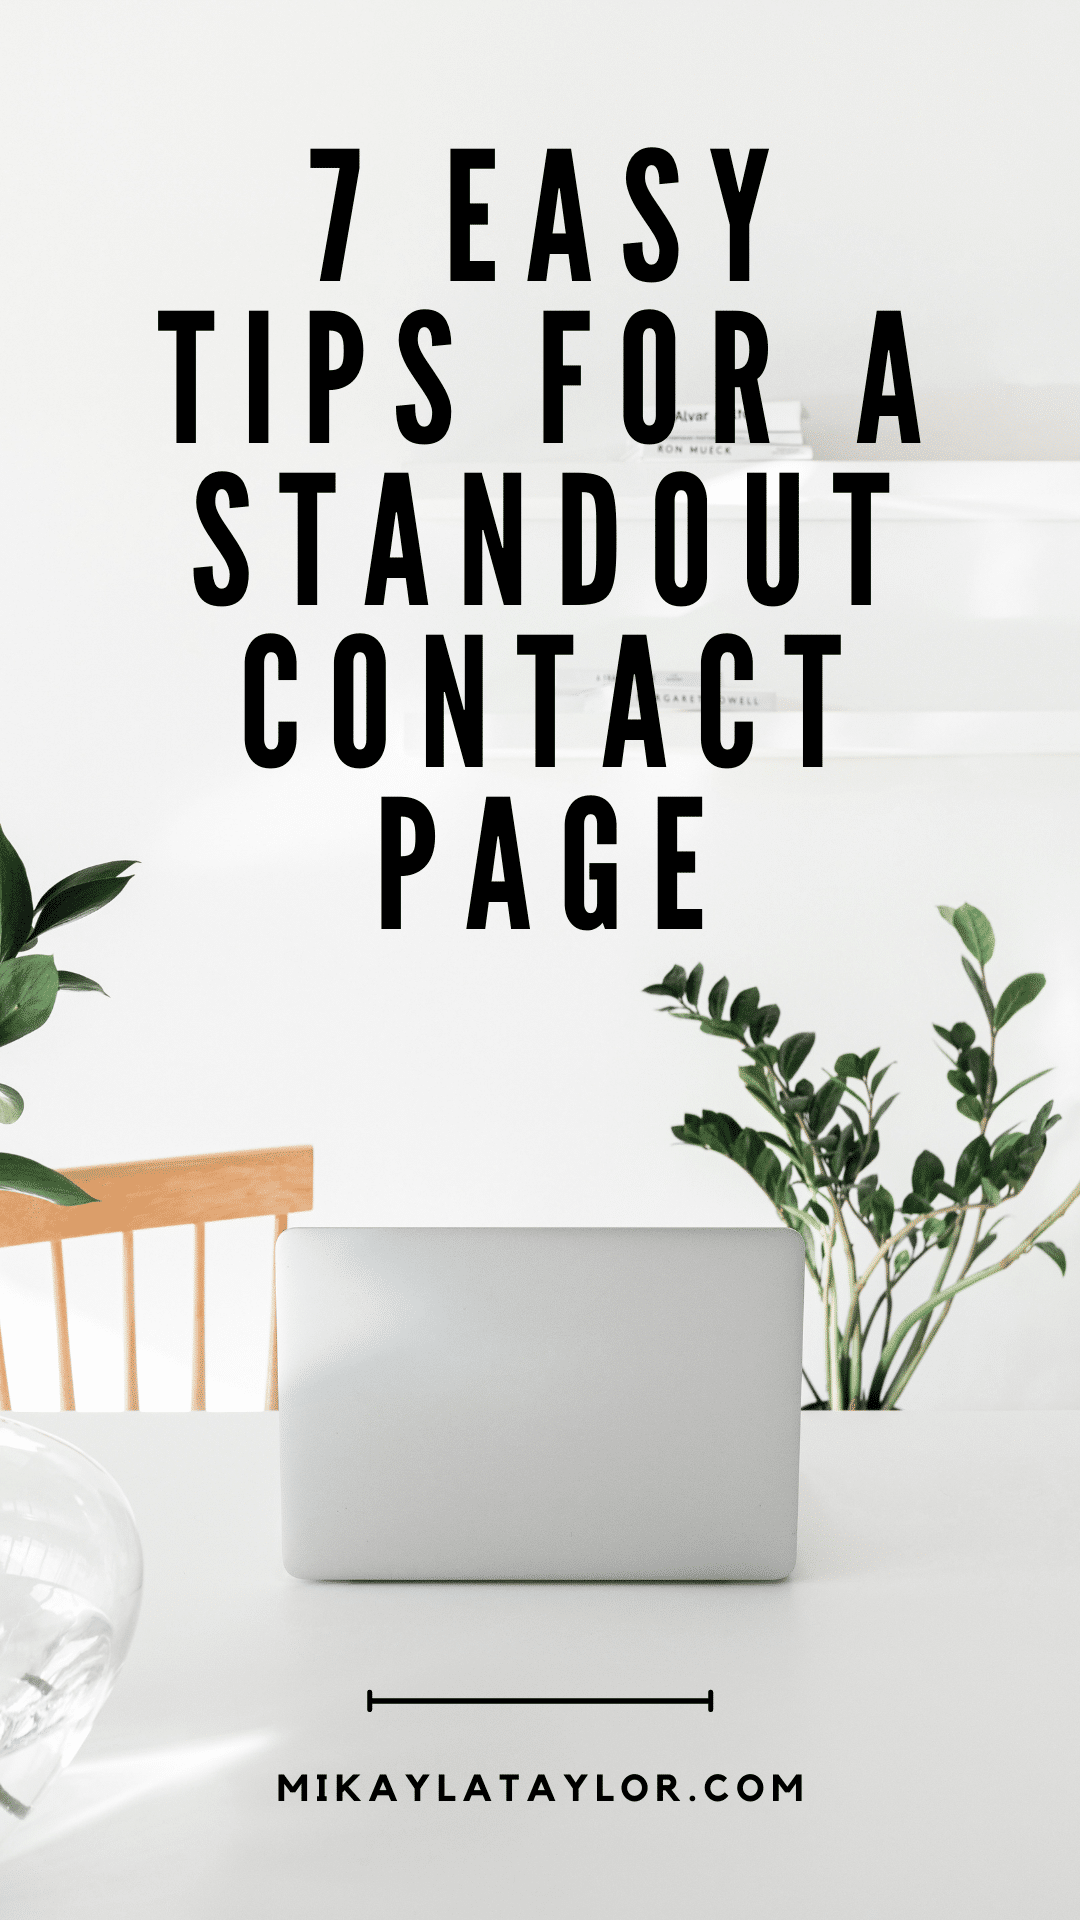 7 Easy Tips for a Standout Contact Page Pinterest1